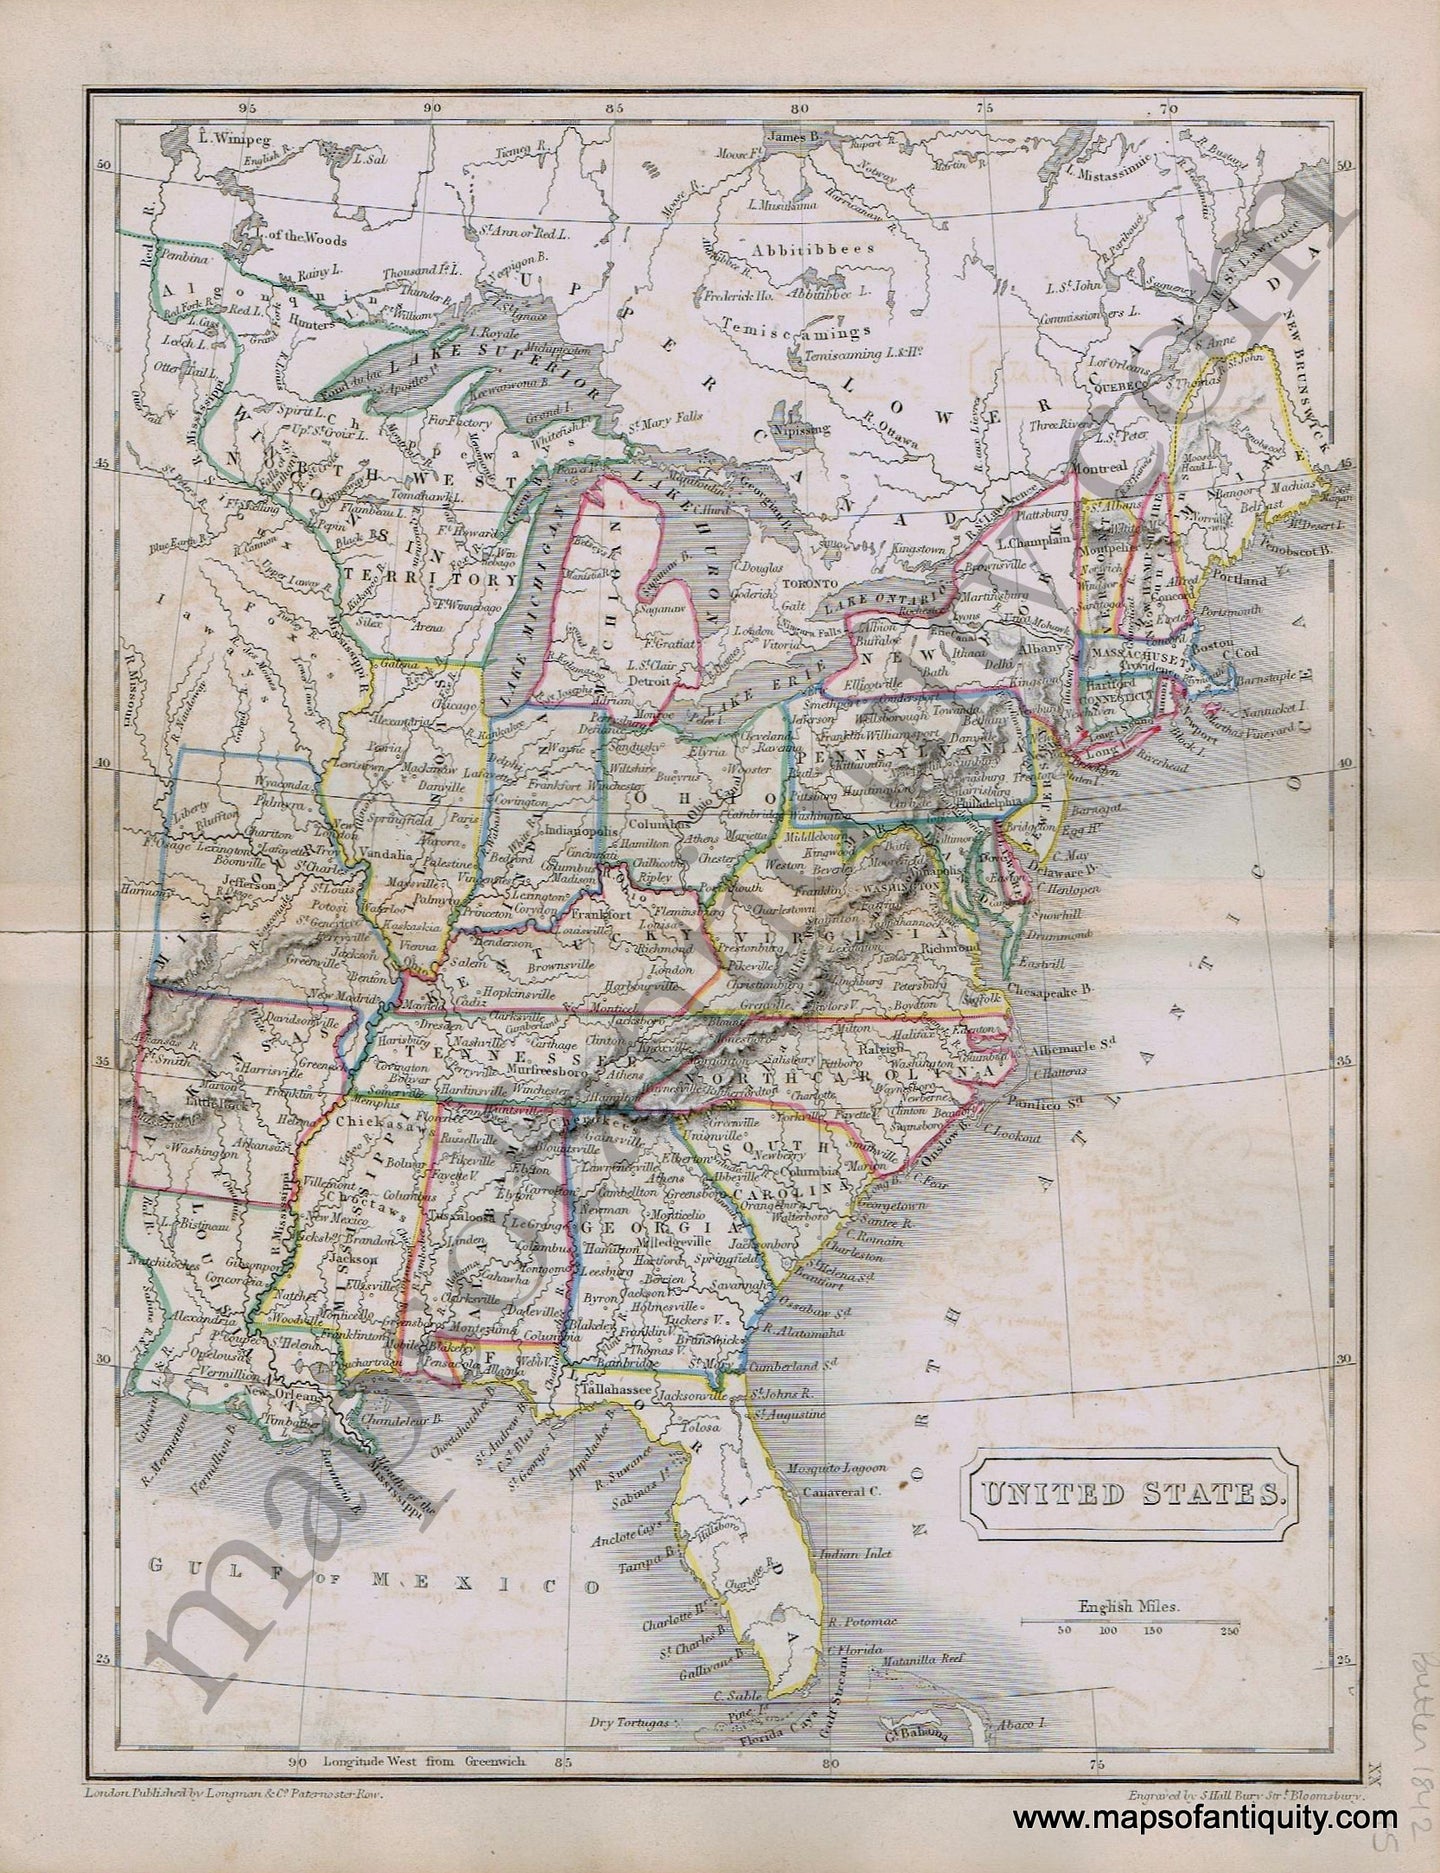 Antique-Hand-Colored-Map-United-States.-1842-Butler-1800s-19th-century-Maps-of-Antiquity